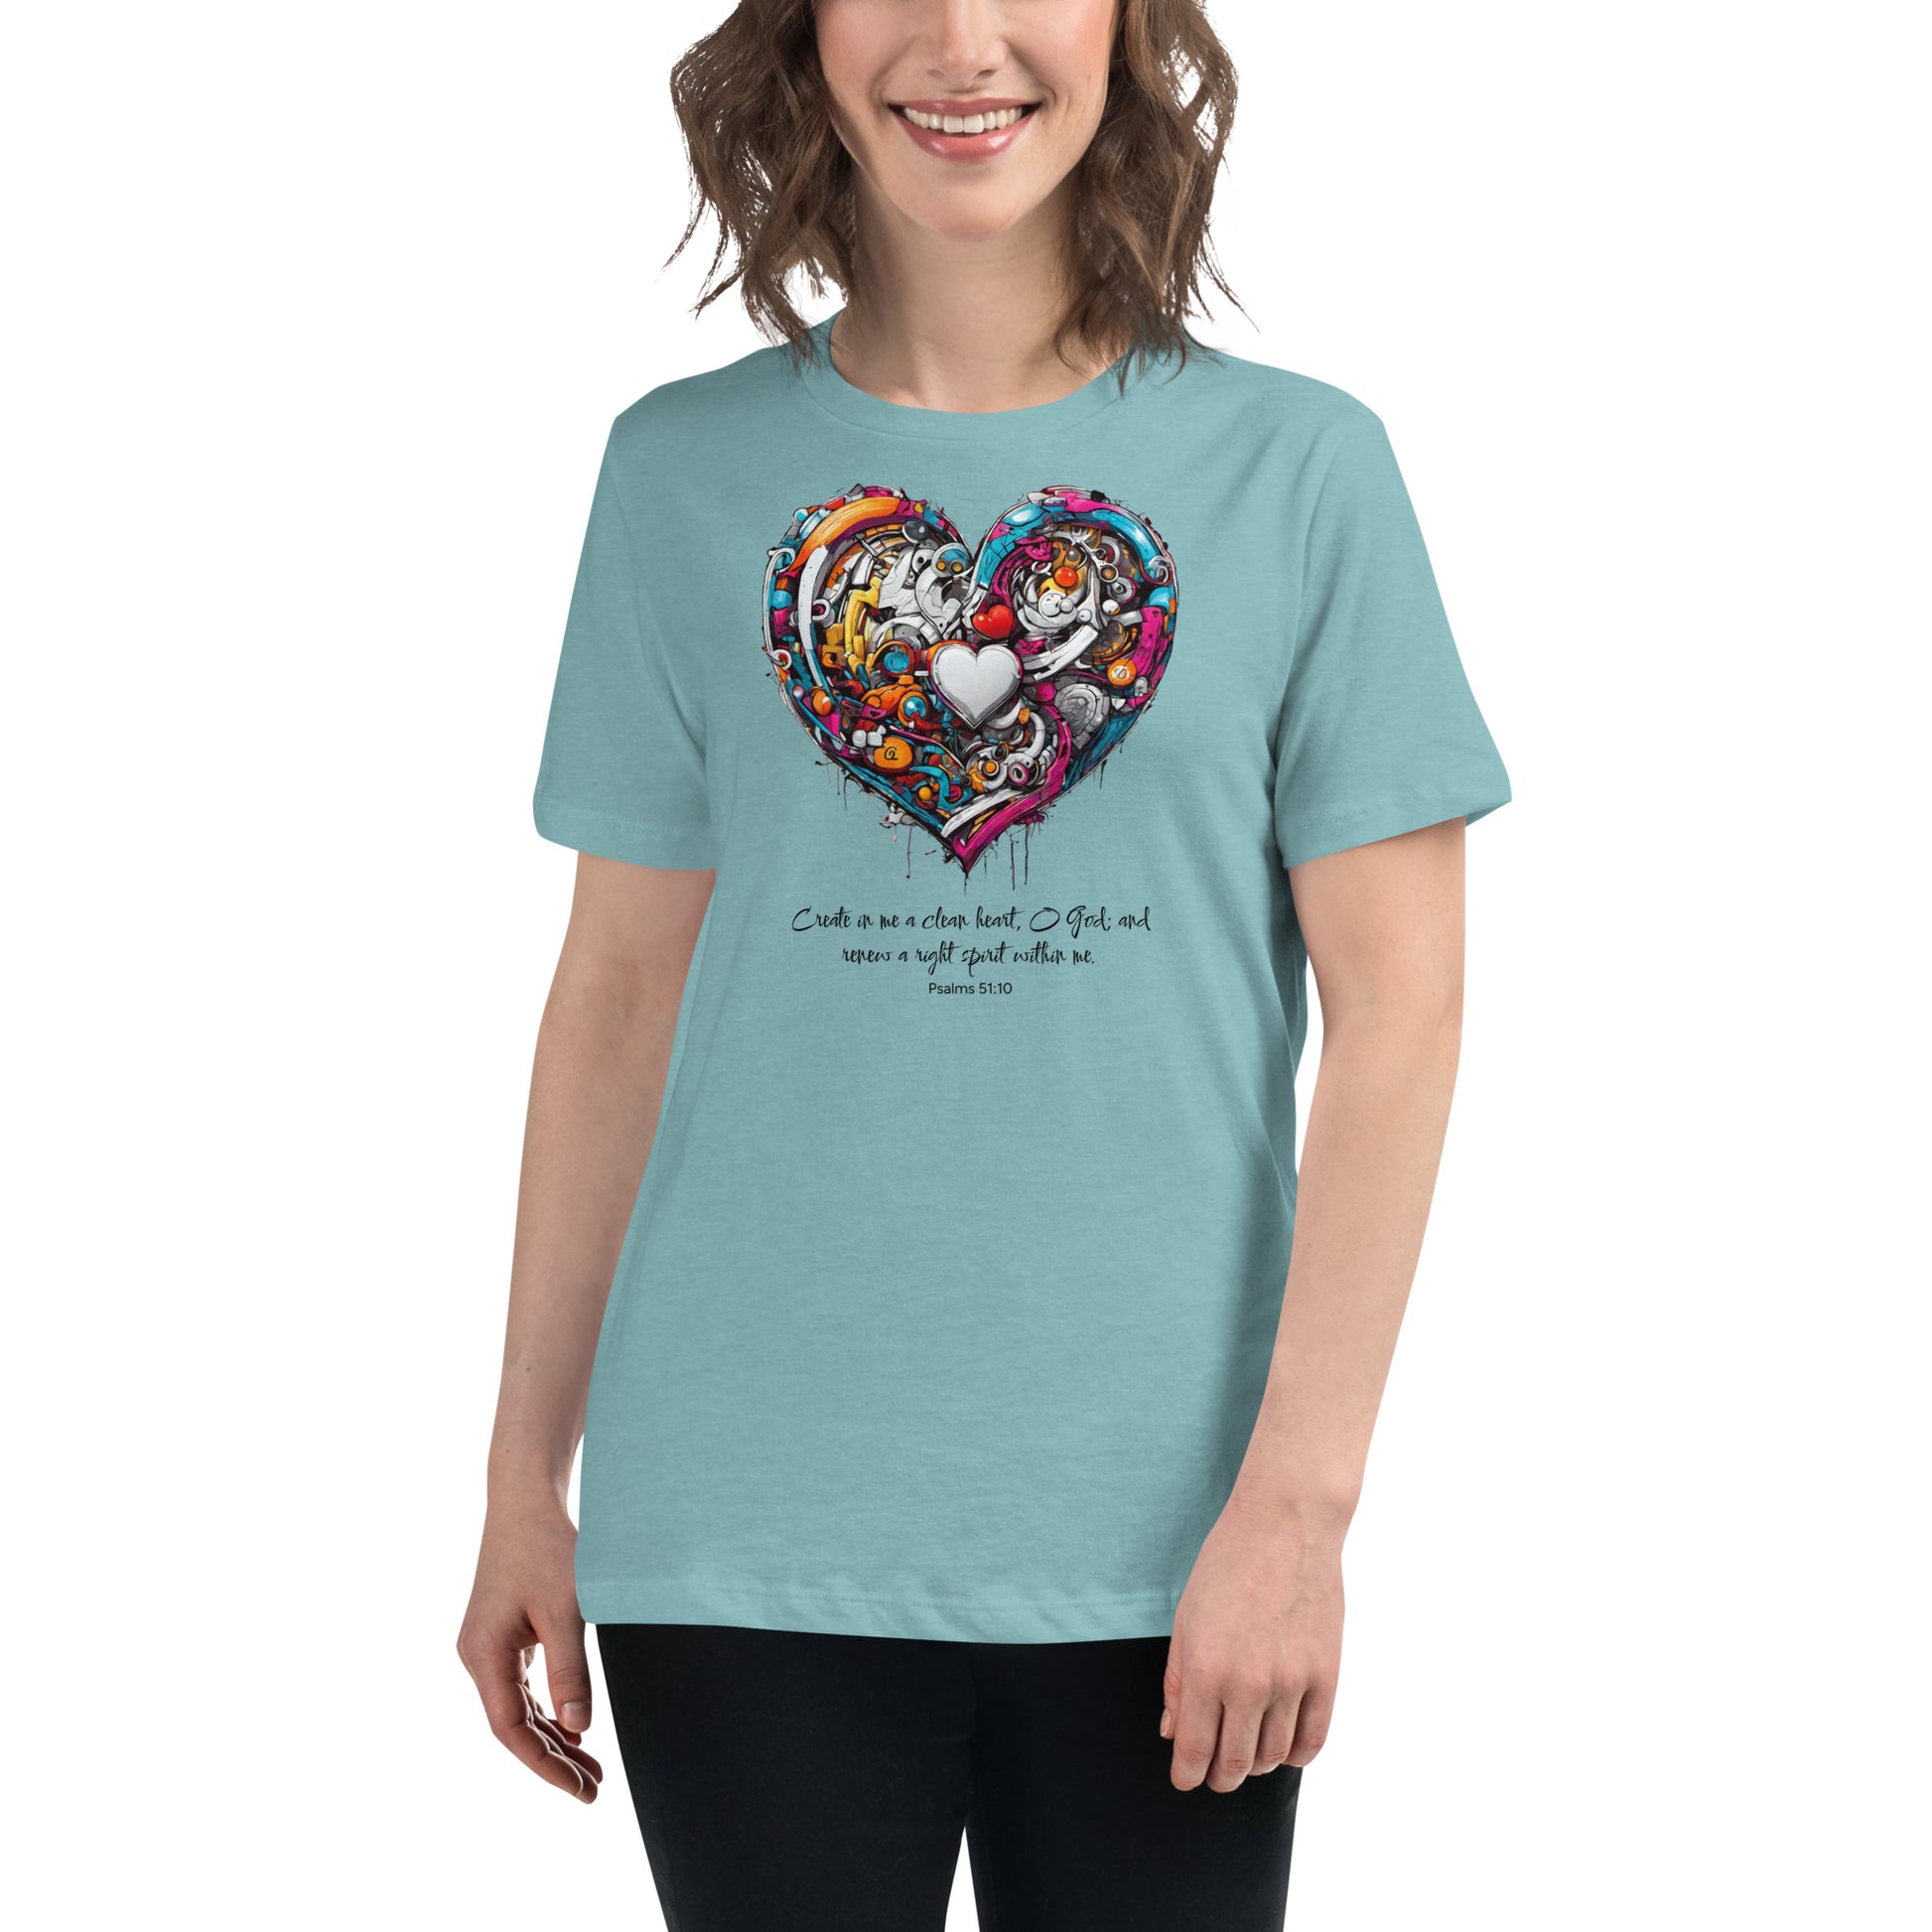 Blessed are the Pure in Heart Women's Christian T-Shirt